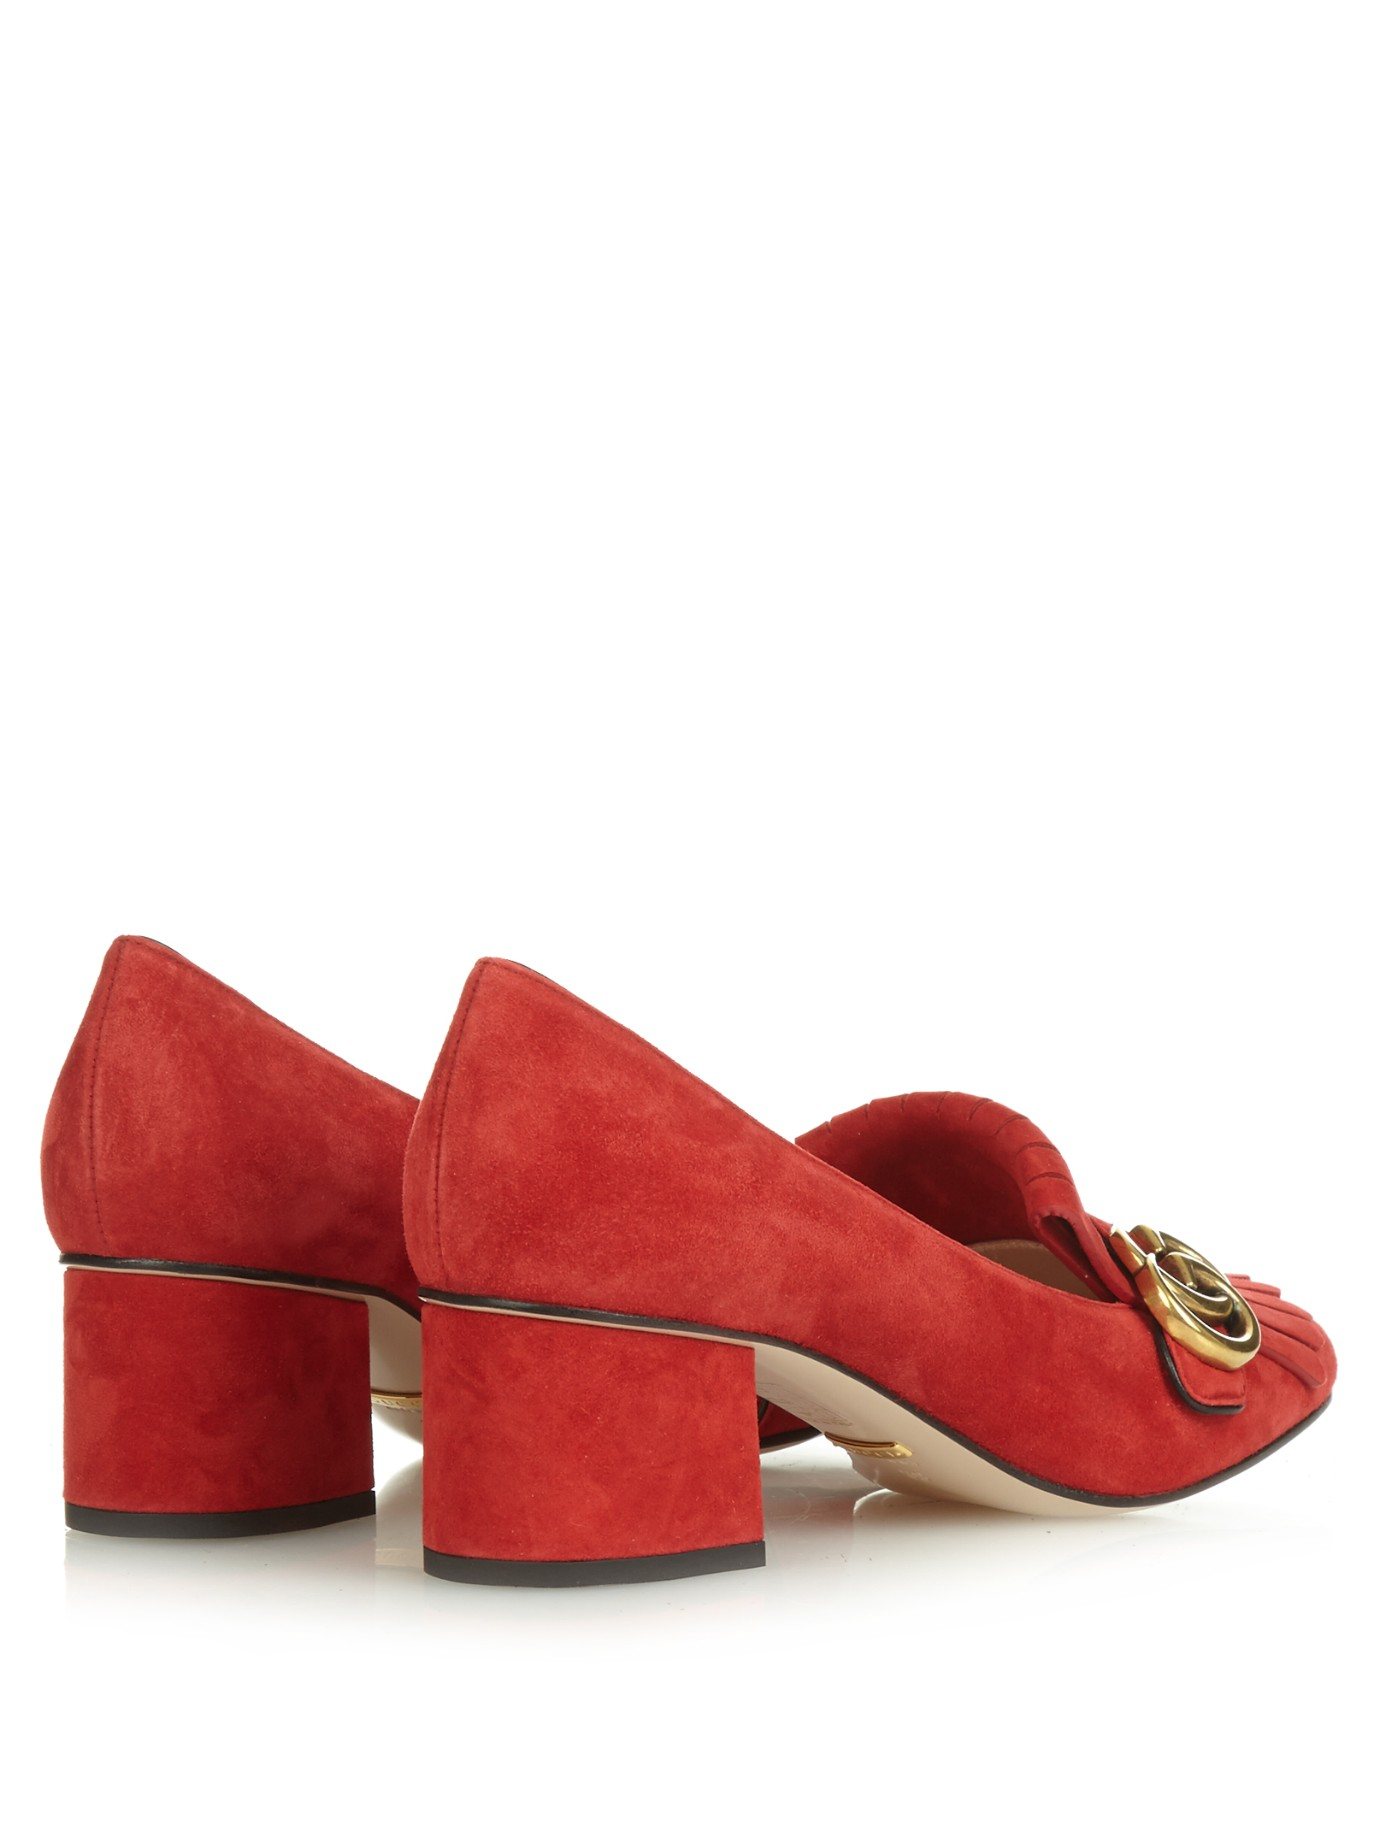 Gucci Marmont Fringed Suede Pumps in Red | Lyst